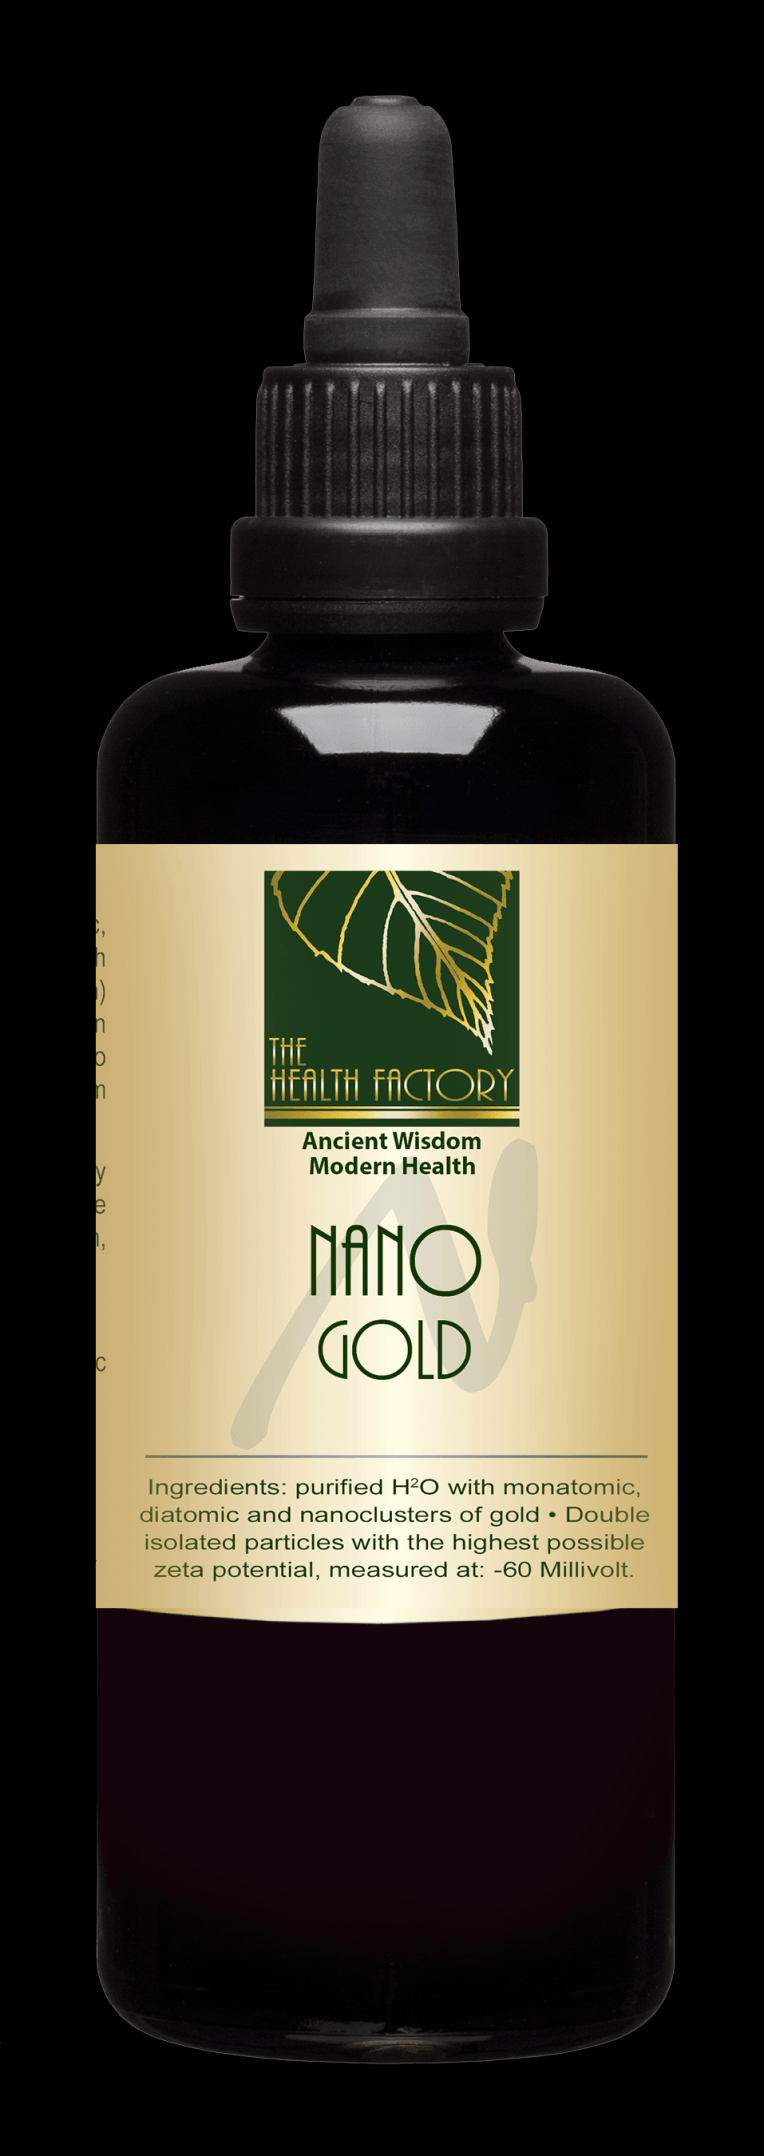 The Health Factory Nano Gold 100ml - Approved Vitamins